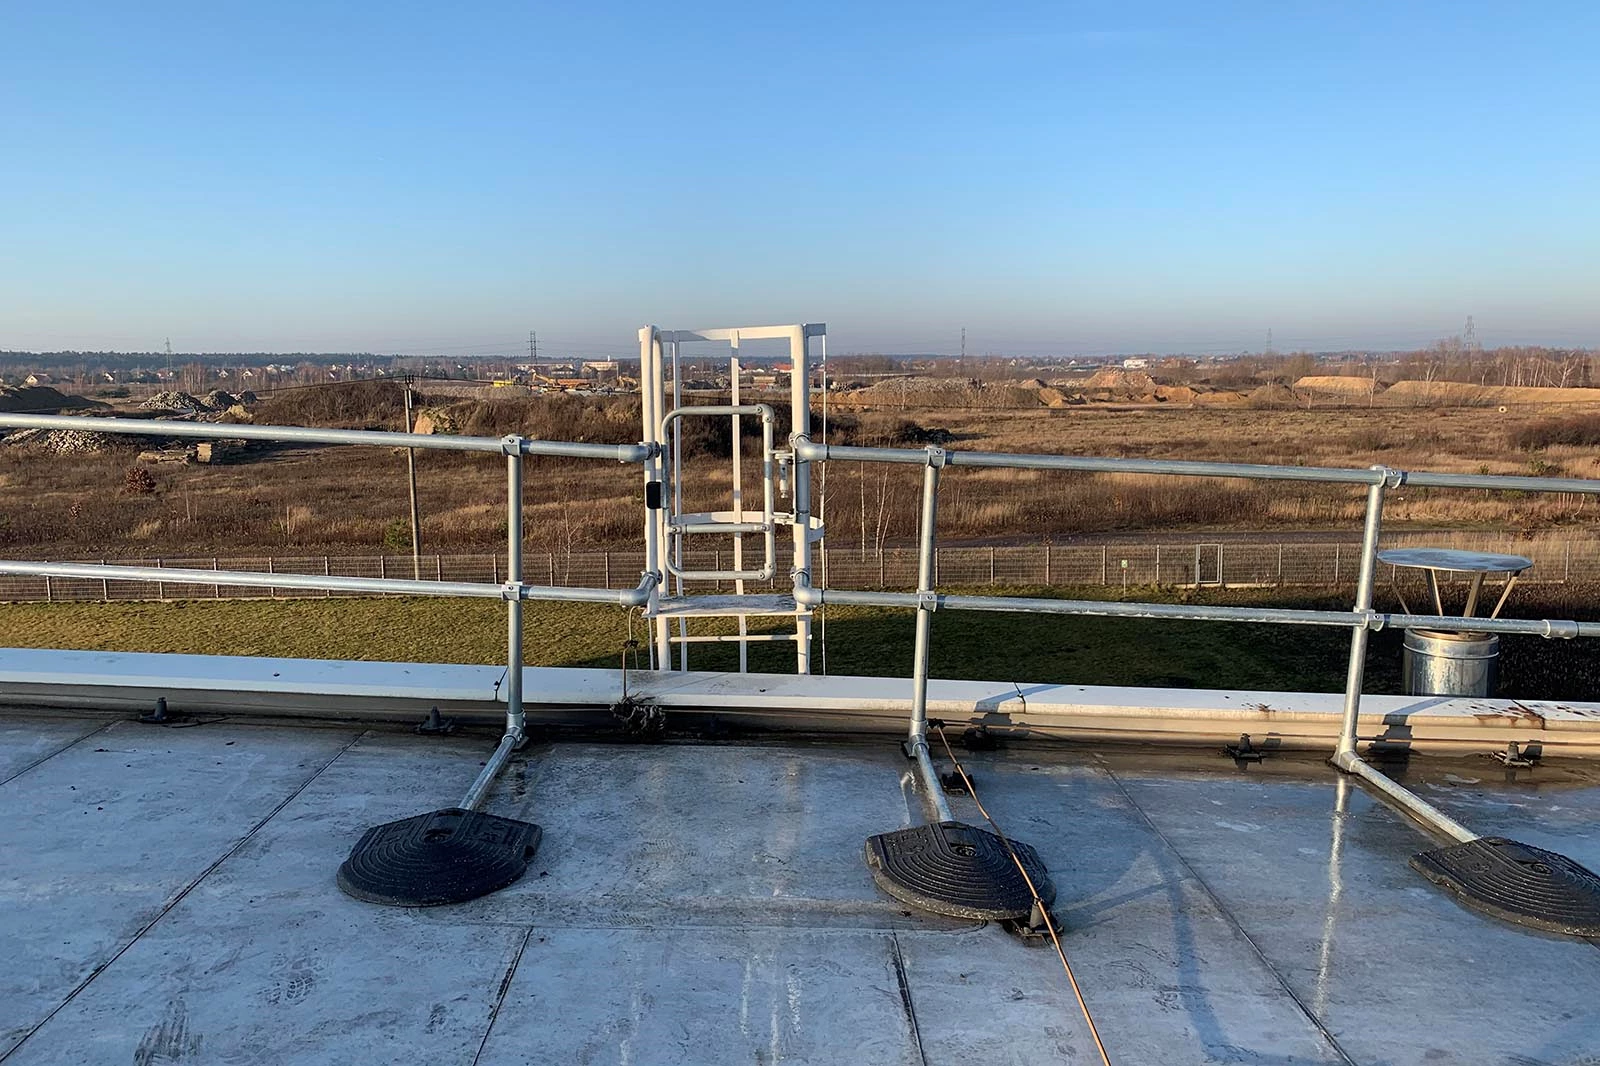 Rooftop guardrails for ladder access points